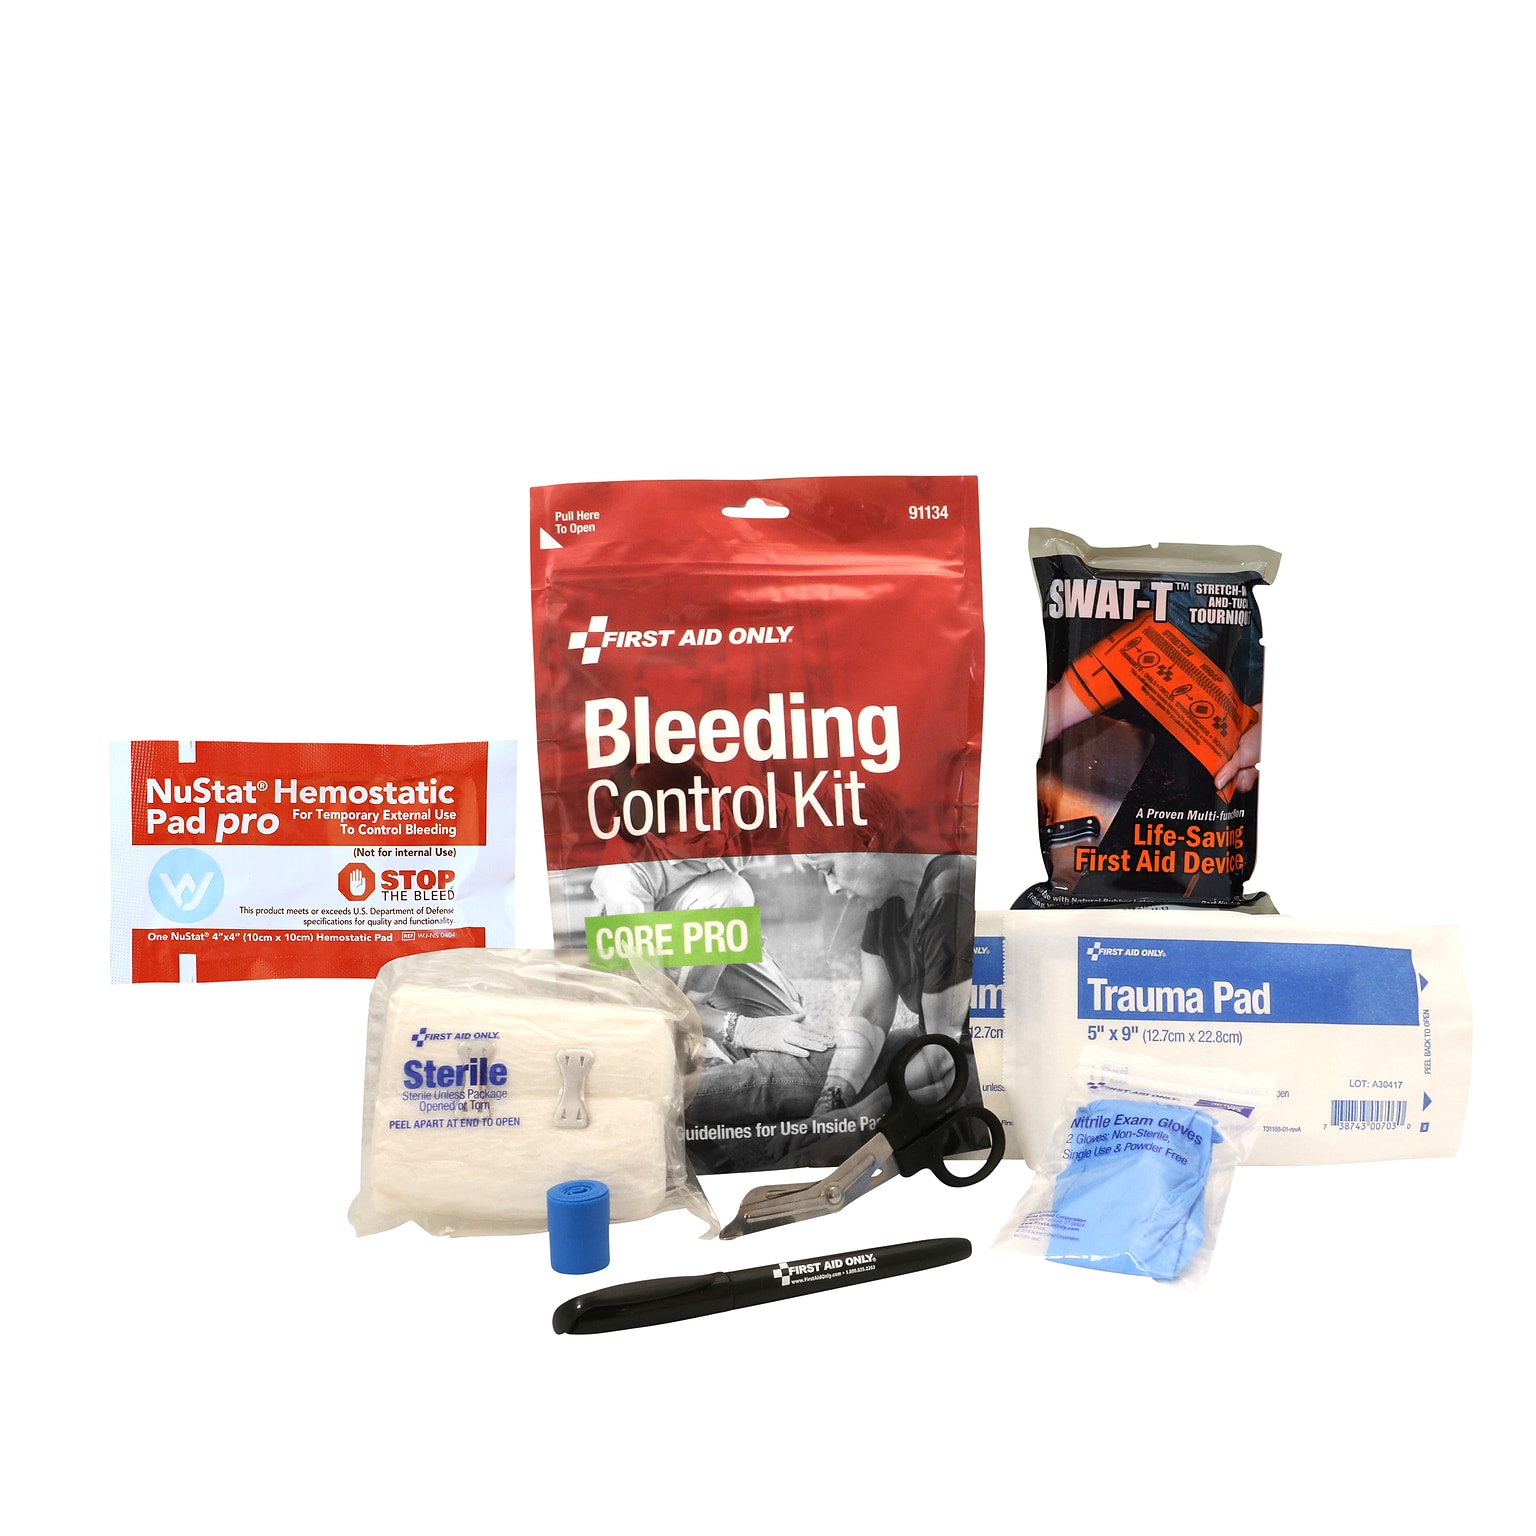 First Aid Only Core Pro 11-Piece Bleeding Control Kit (91134)